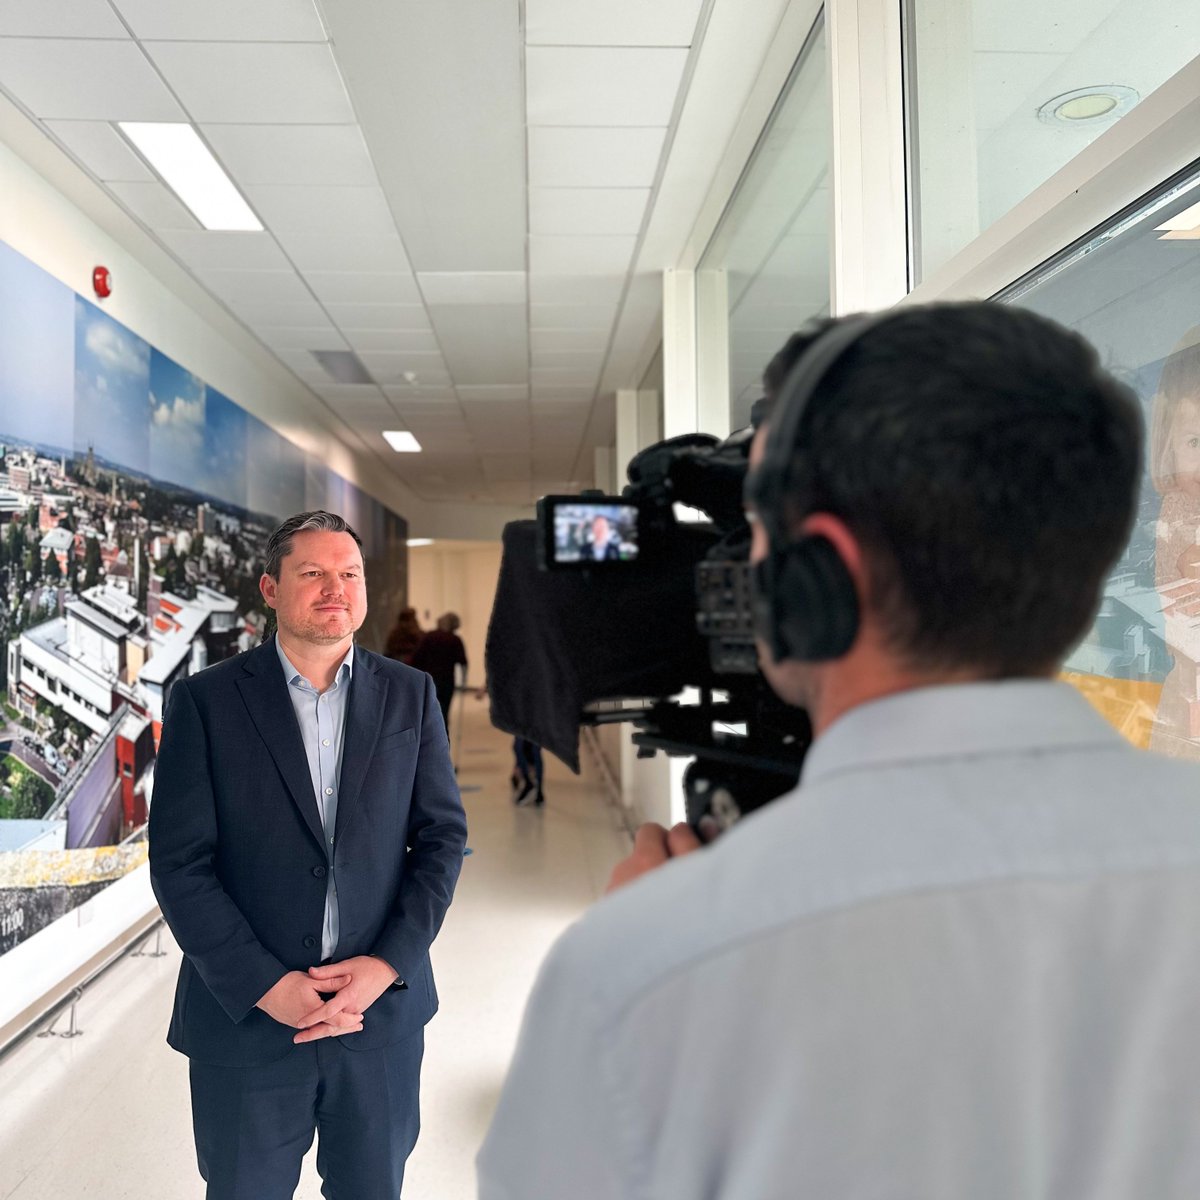 Behind the scenes with our Chief Executive Kevin McNamara at Gloucester Royal Hospital - creating a video to promote a very exciting new role, coming soon 👀 
#ABetterCareerStartsHere #BTS #NHSJobs #BehindTheScenes @gloshospitals